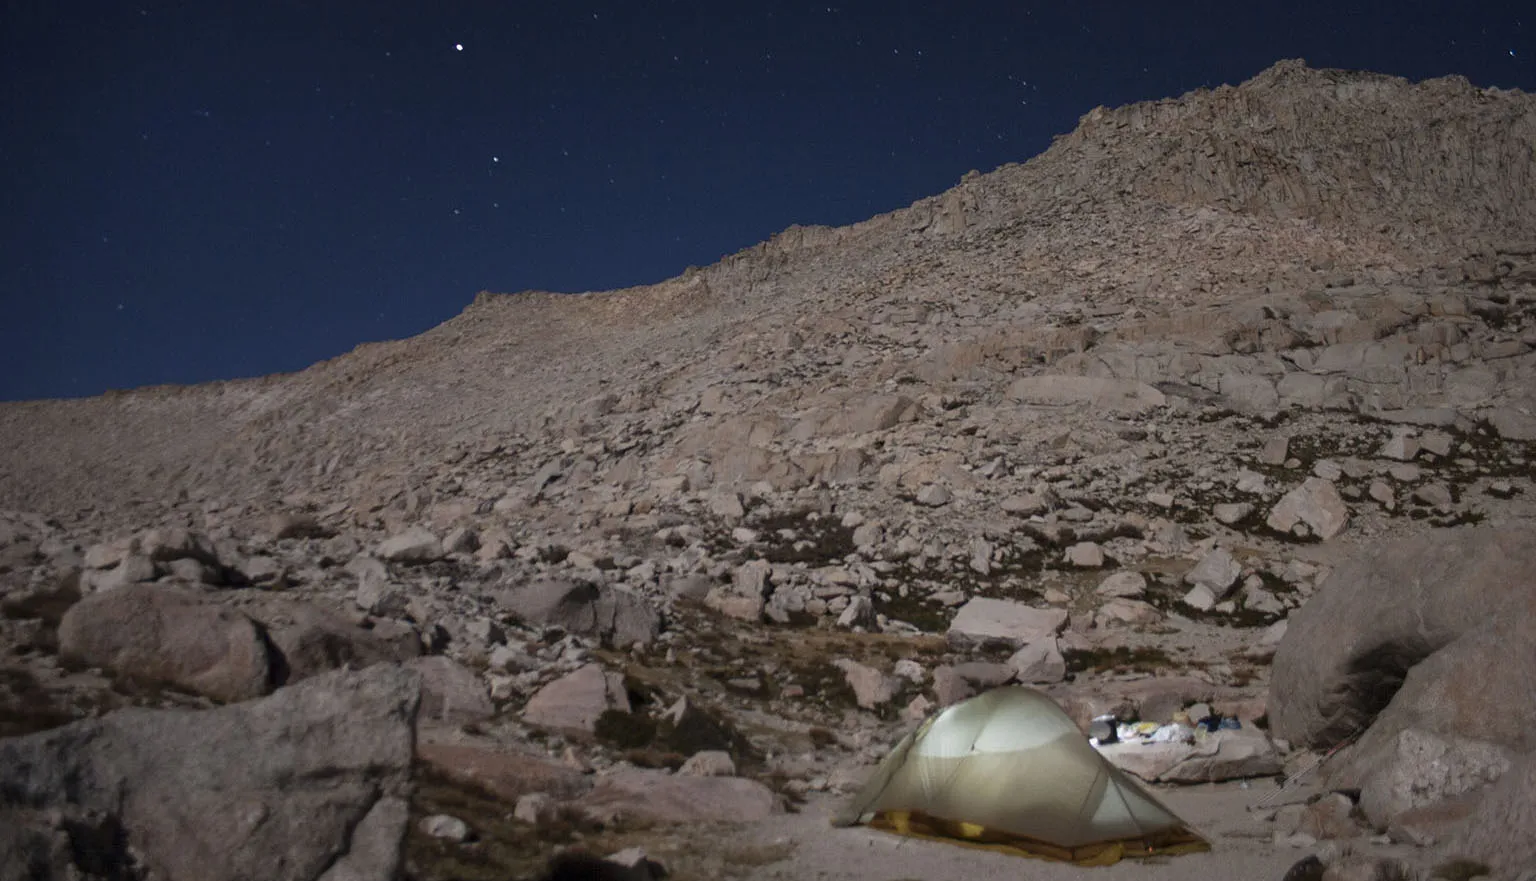 Our moonlit camp at High Lake, New Army Pass in the background